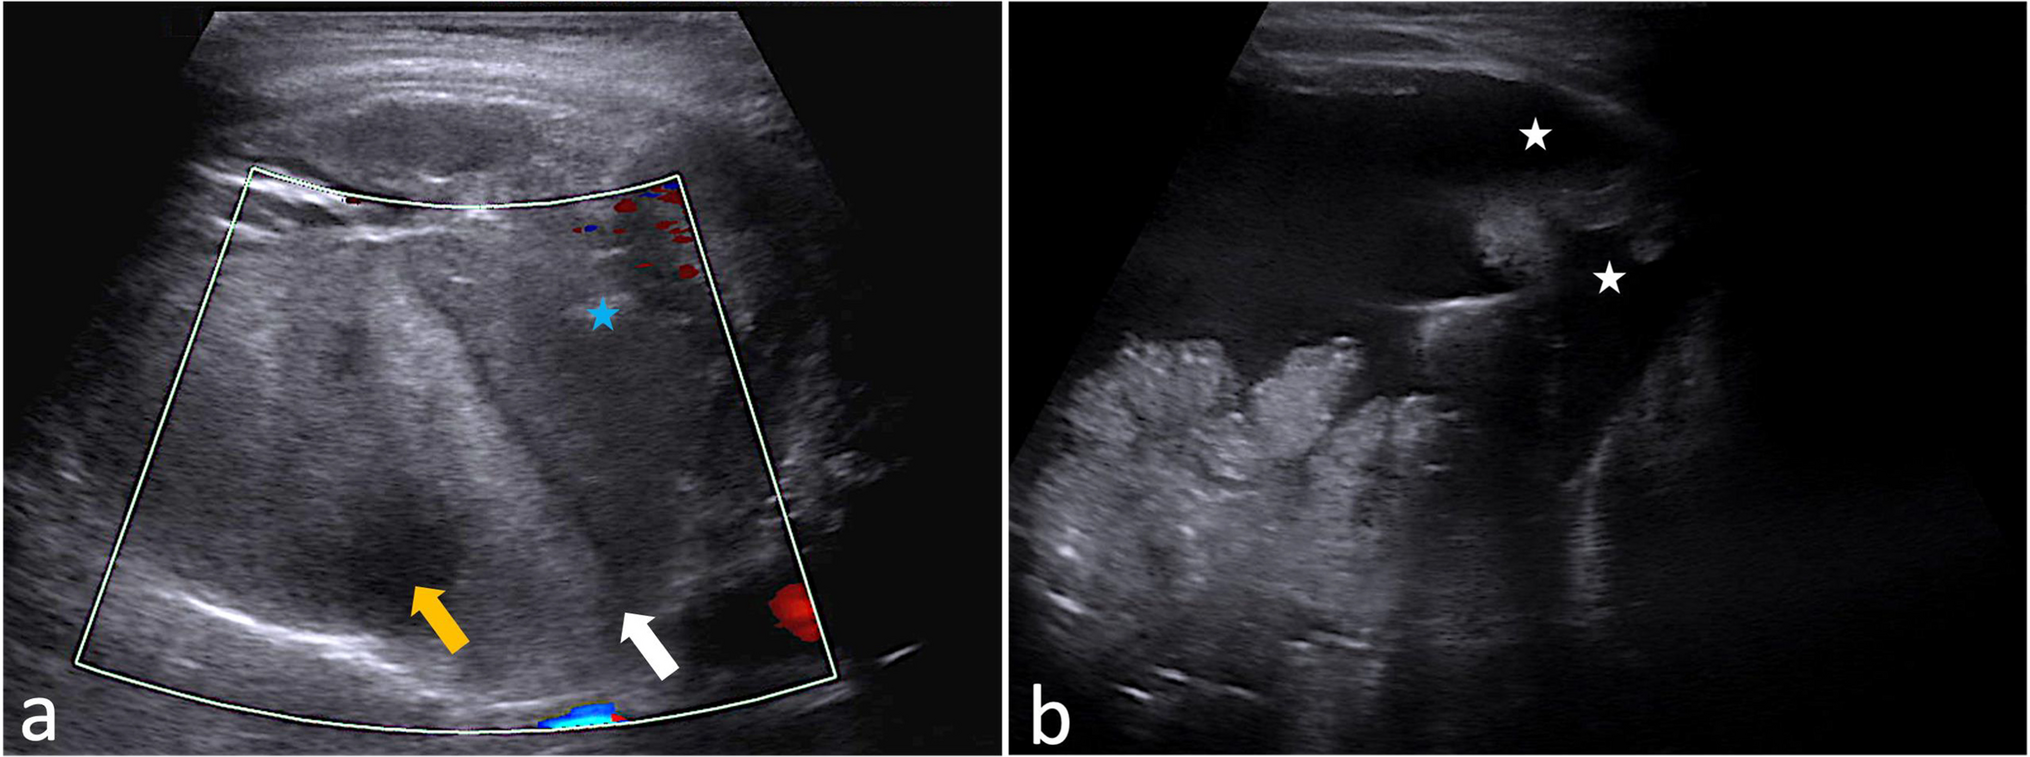 Spontaneous splenic rupture in a neonate: a case report and literature review